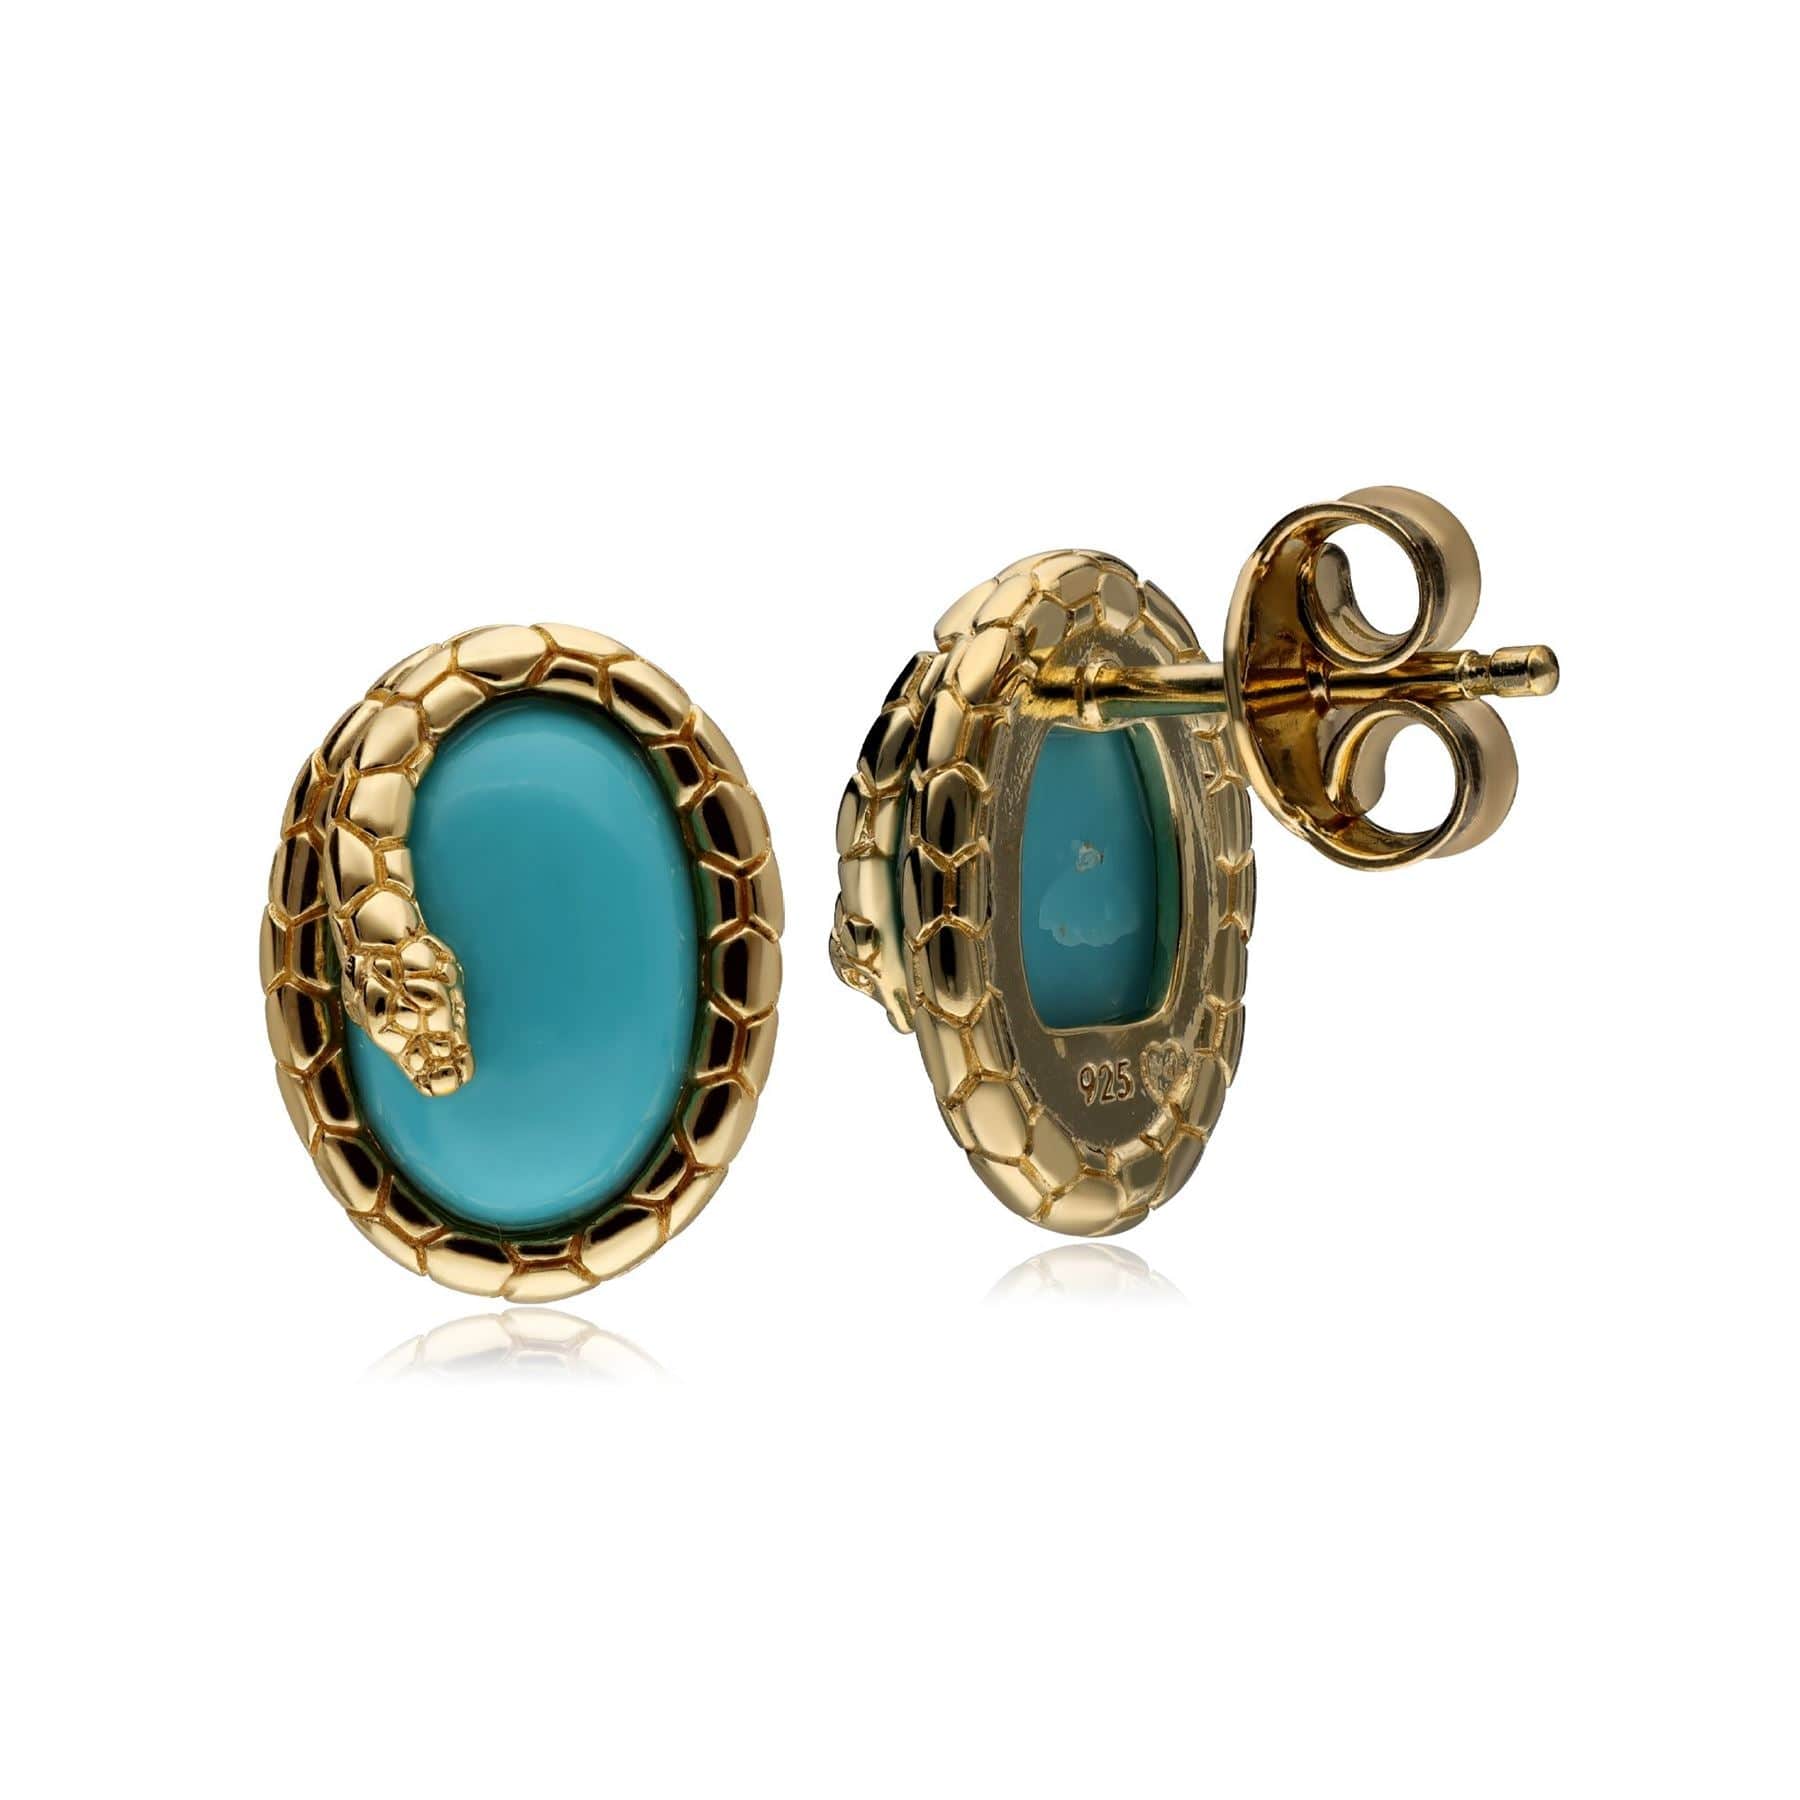 ECFEW™ 'The Ruler' Turquoise Winding Snake Stud Earrings with post and butterfly back